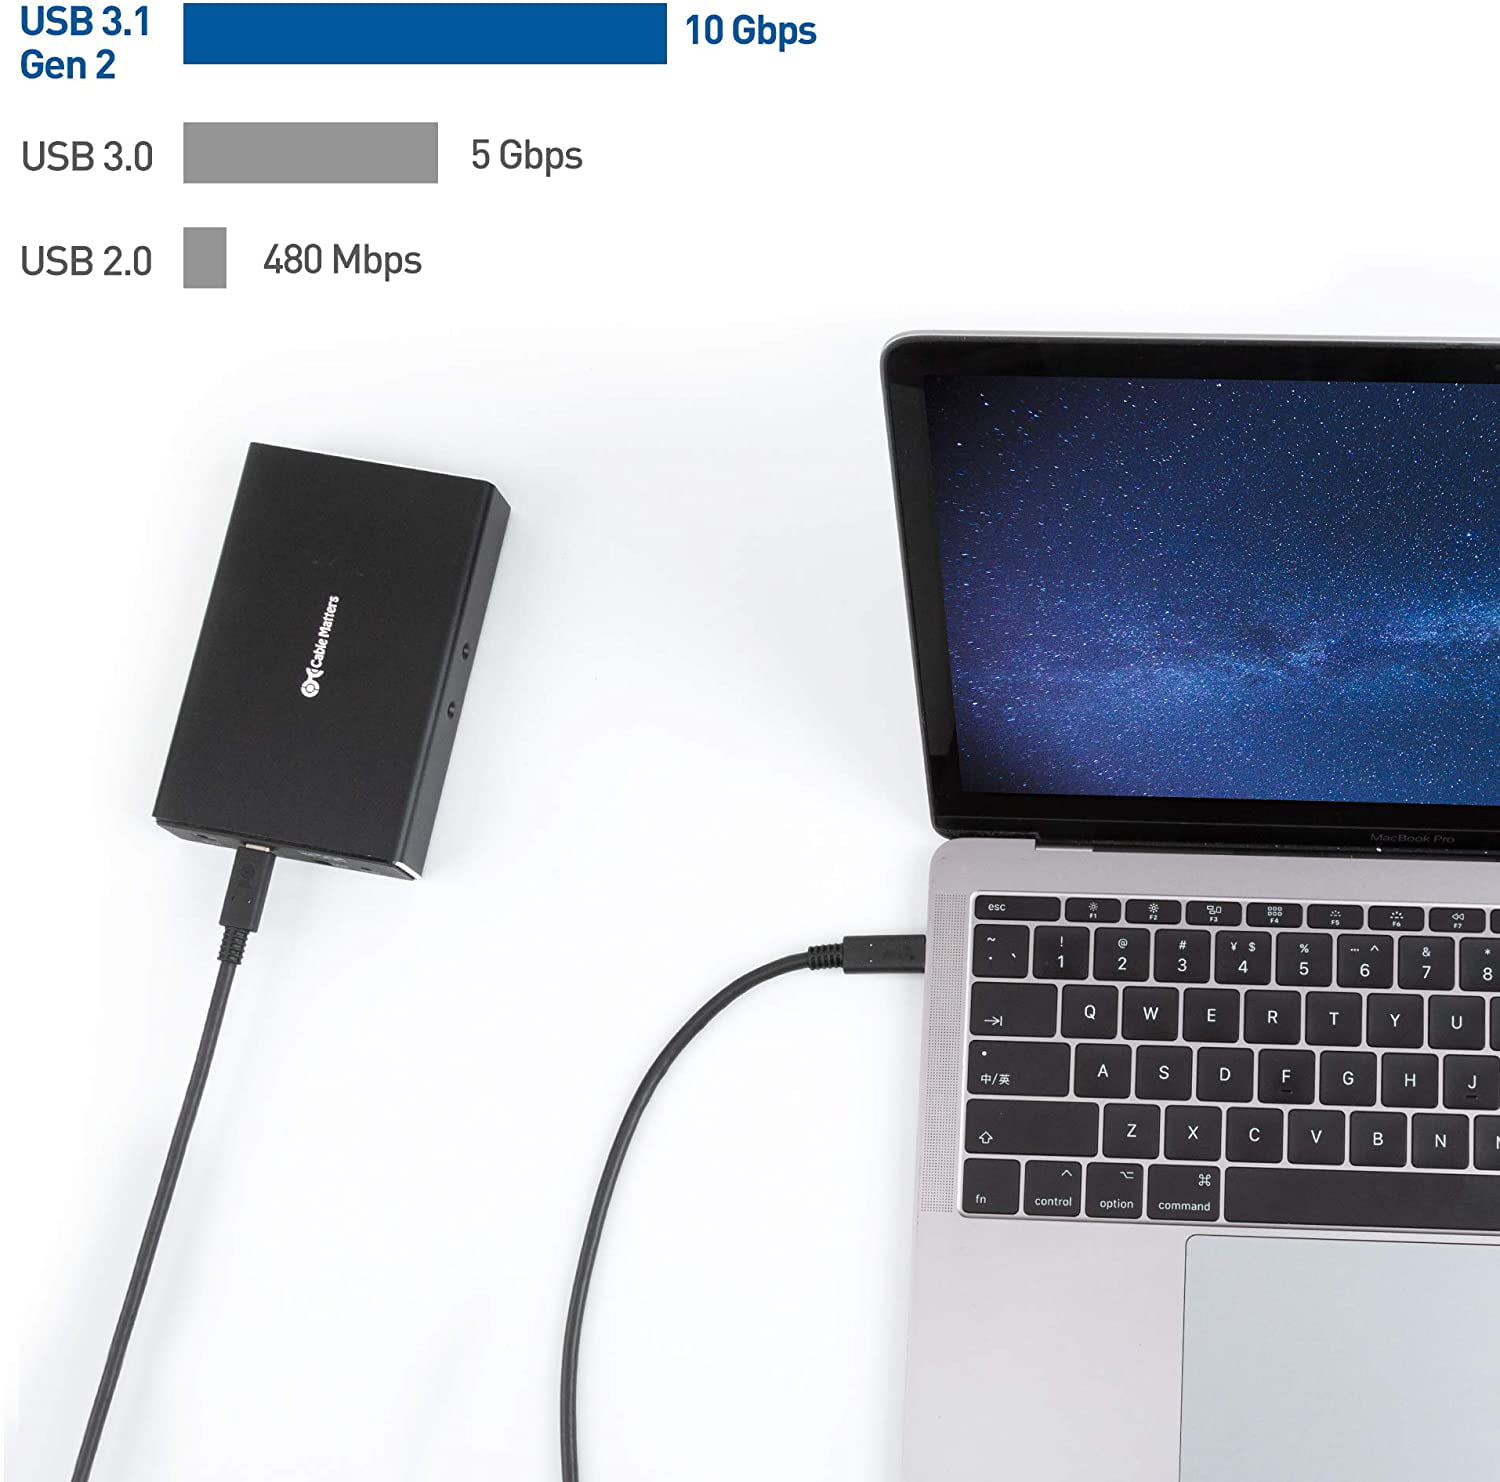 and USB C Laptops Thunderbolt 3 Cable 3.3feet 100W Charge.40Gbps.Compatible with USB 3.1 Gen 1 and 2 Balck Dual 4k or Single 5k UHD Display MacBook Pro,Dell Alienware 17,Thinkpad 